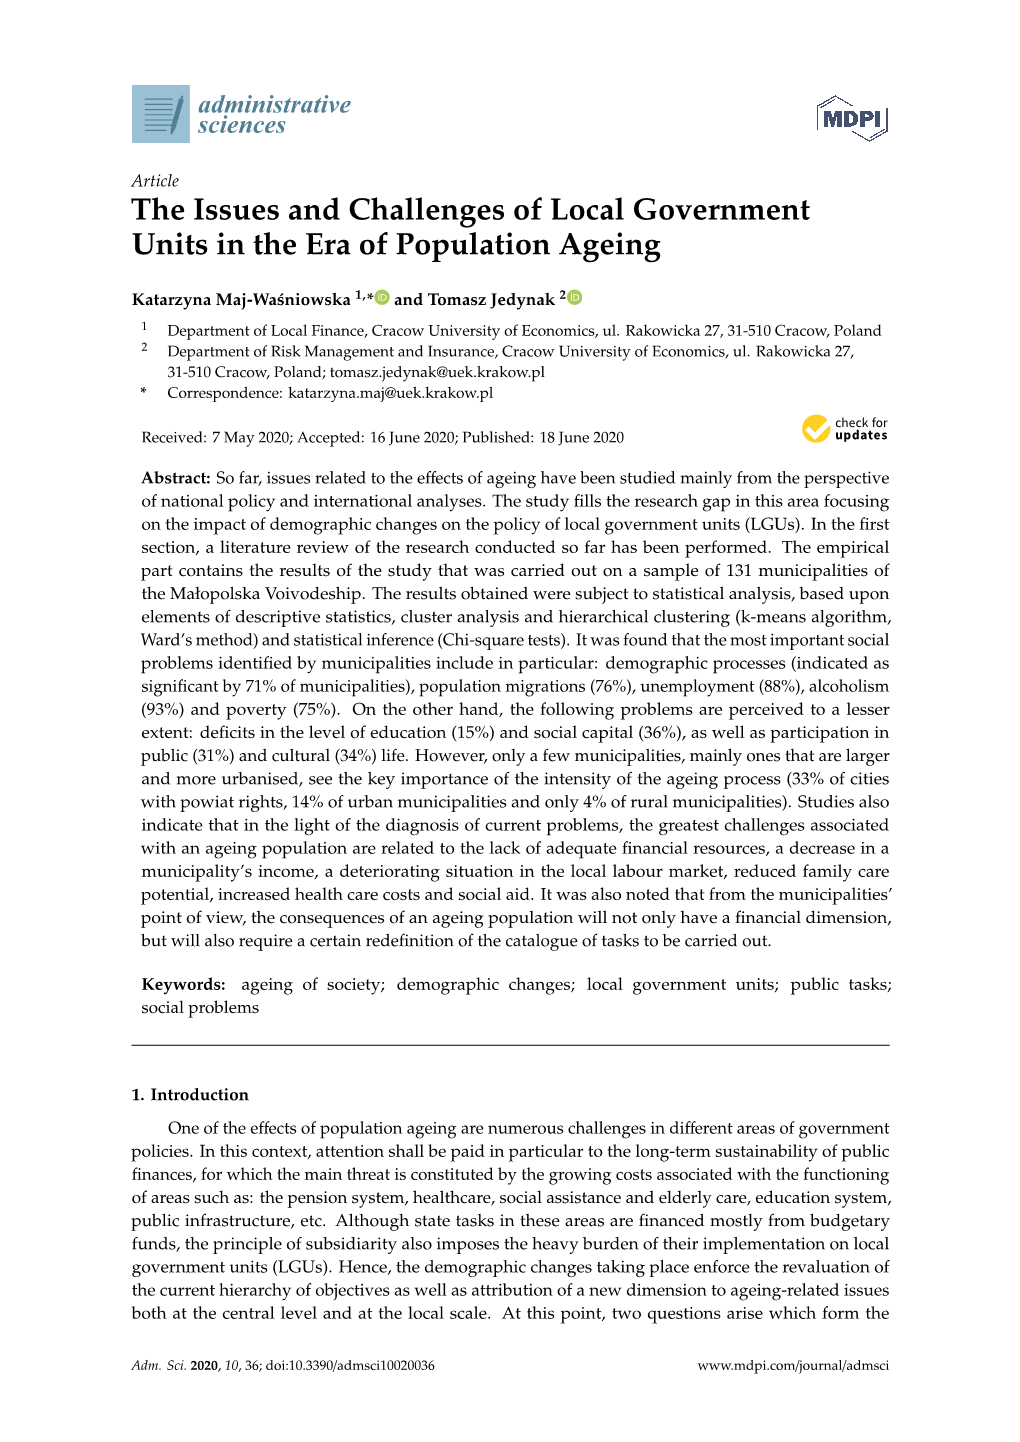 The Issues and Challenges of Local Government Units in the Era of Population Ageing